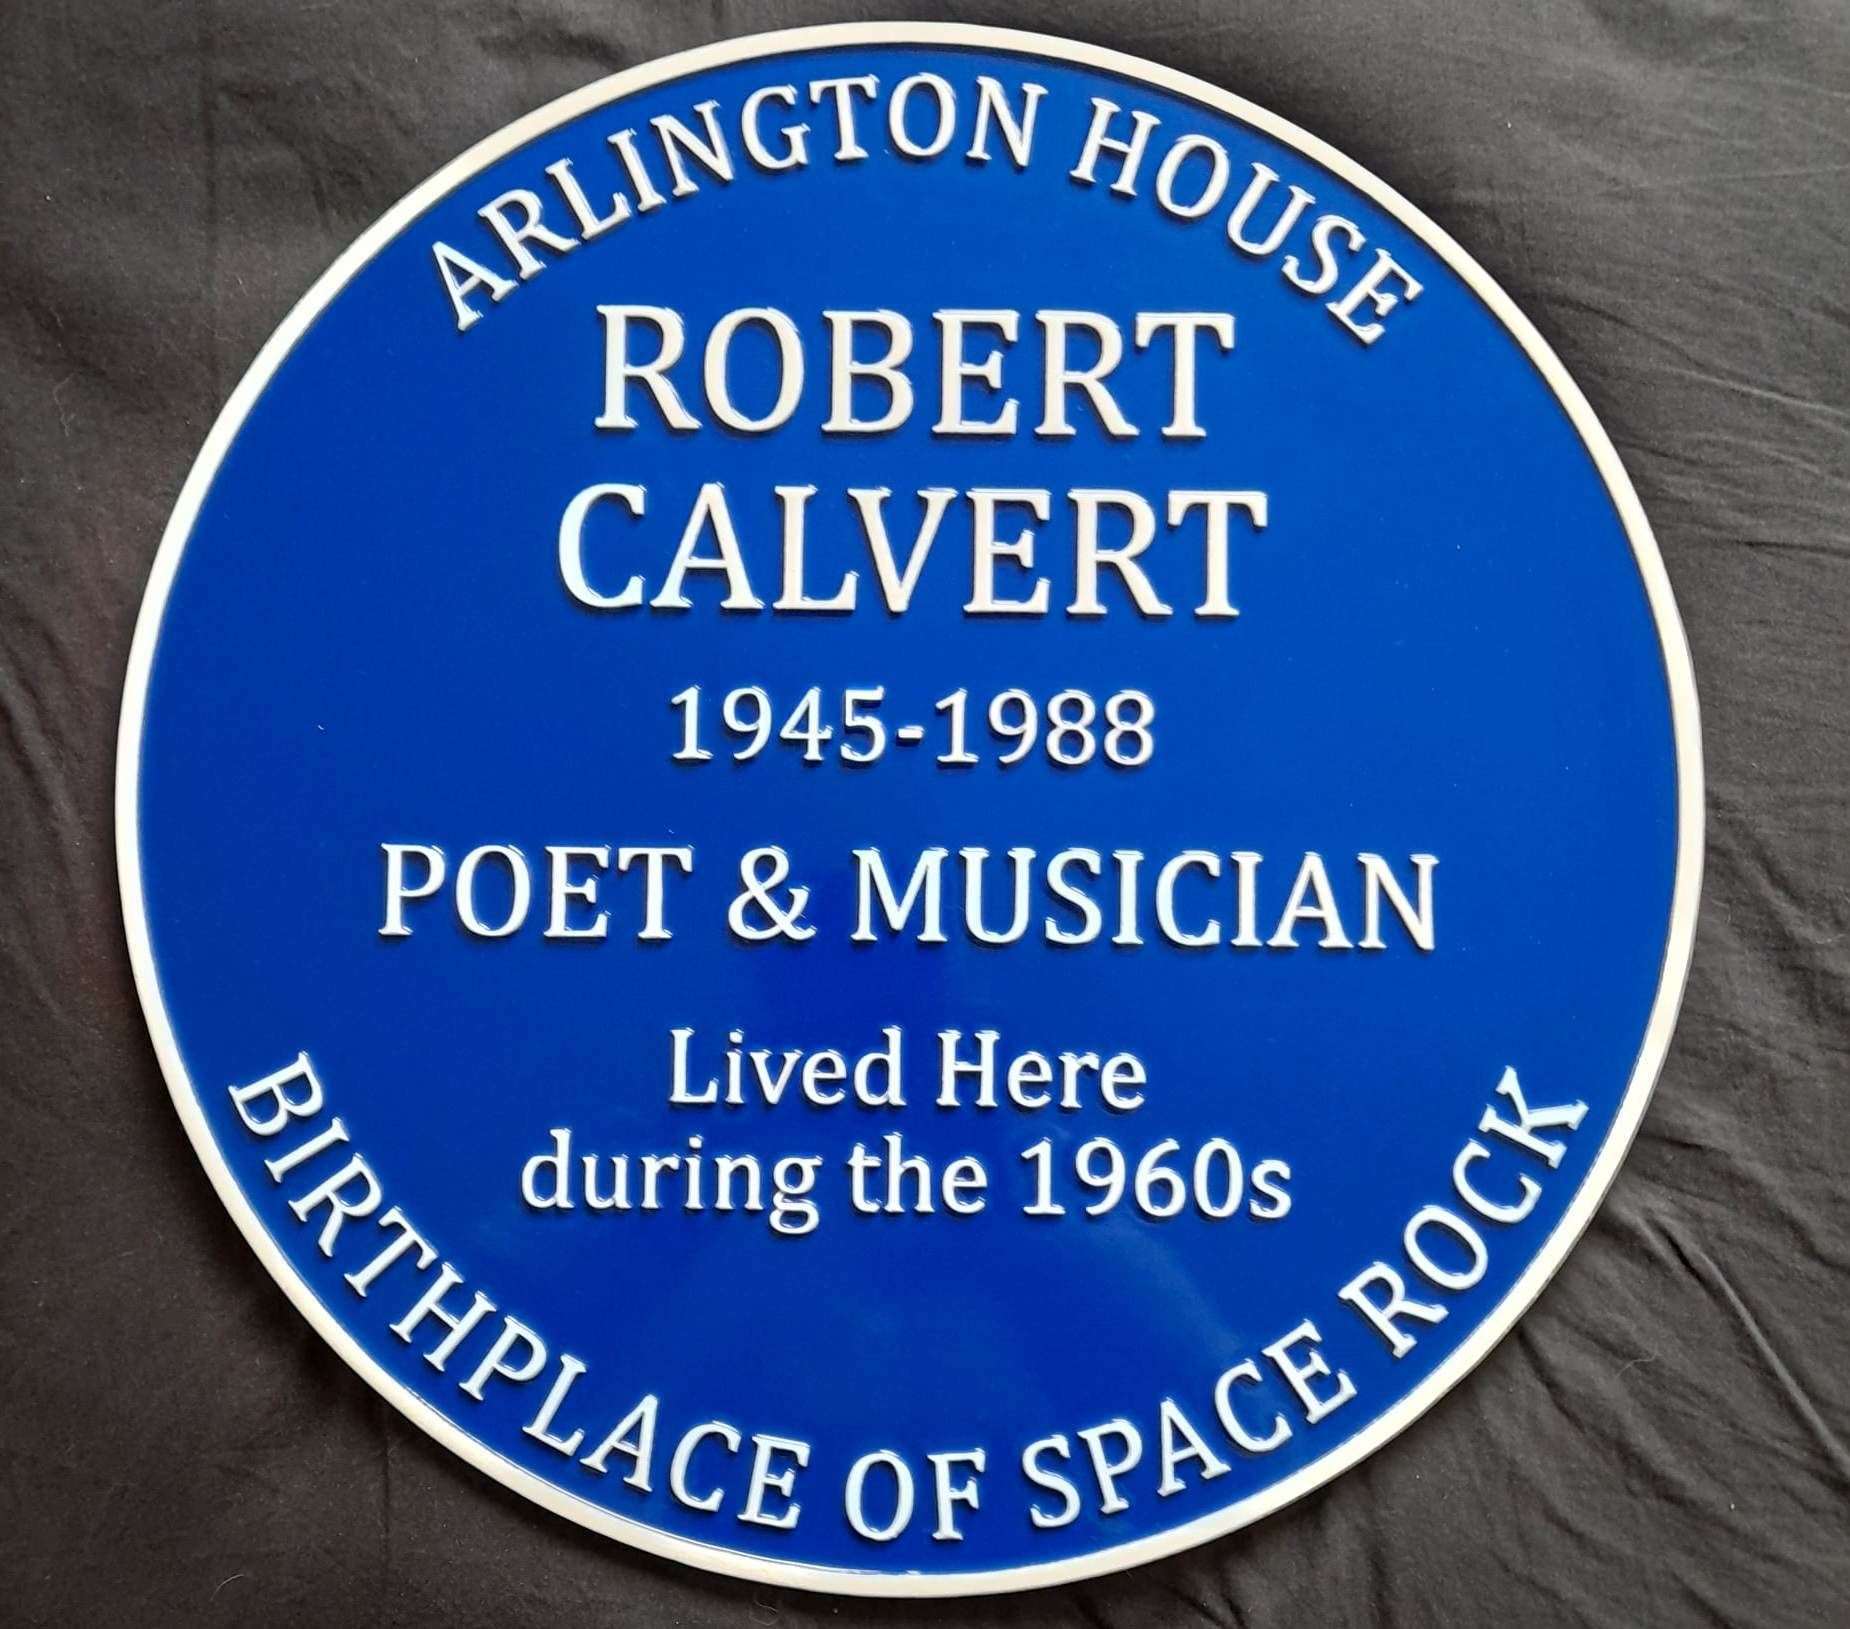 The plaque will be unveiled at Arlington House this Friday. Picture: William Gary